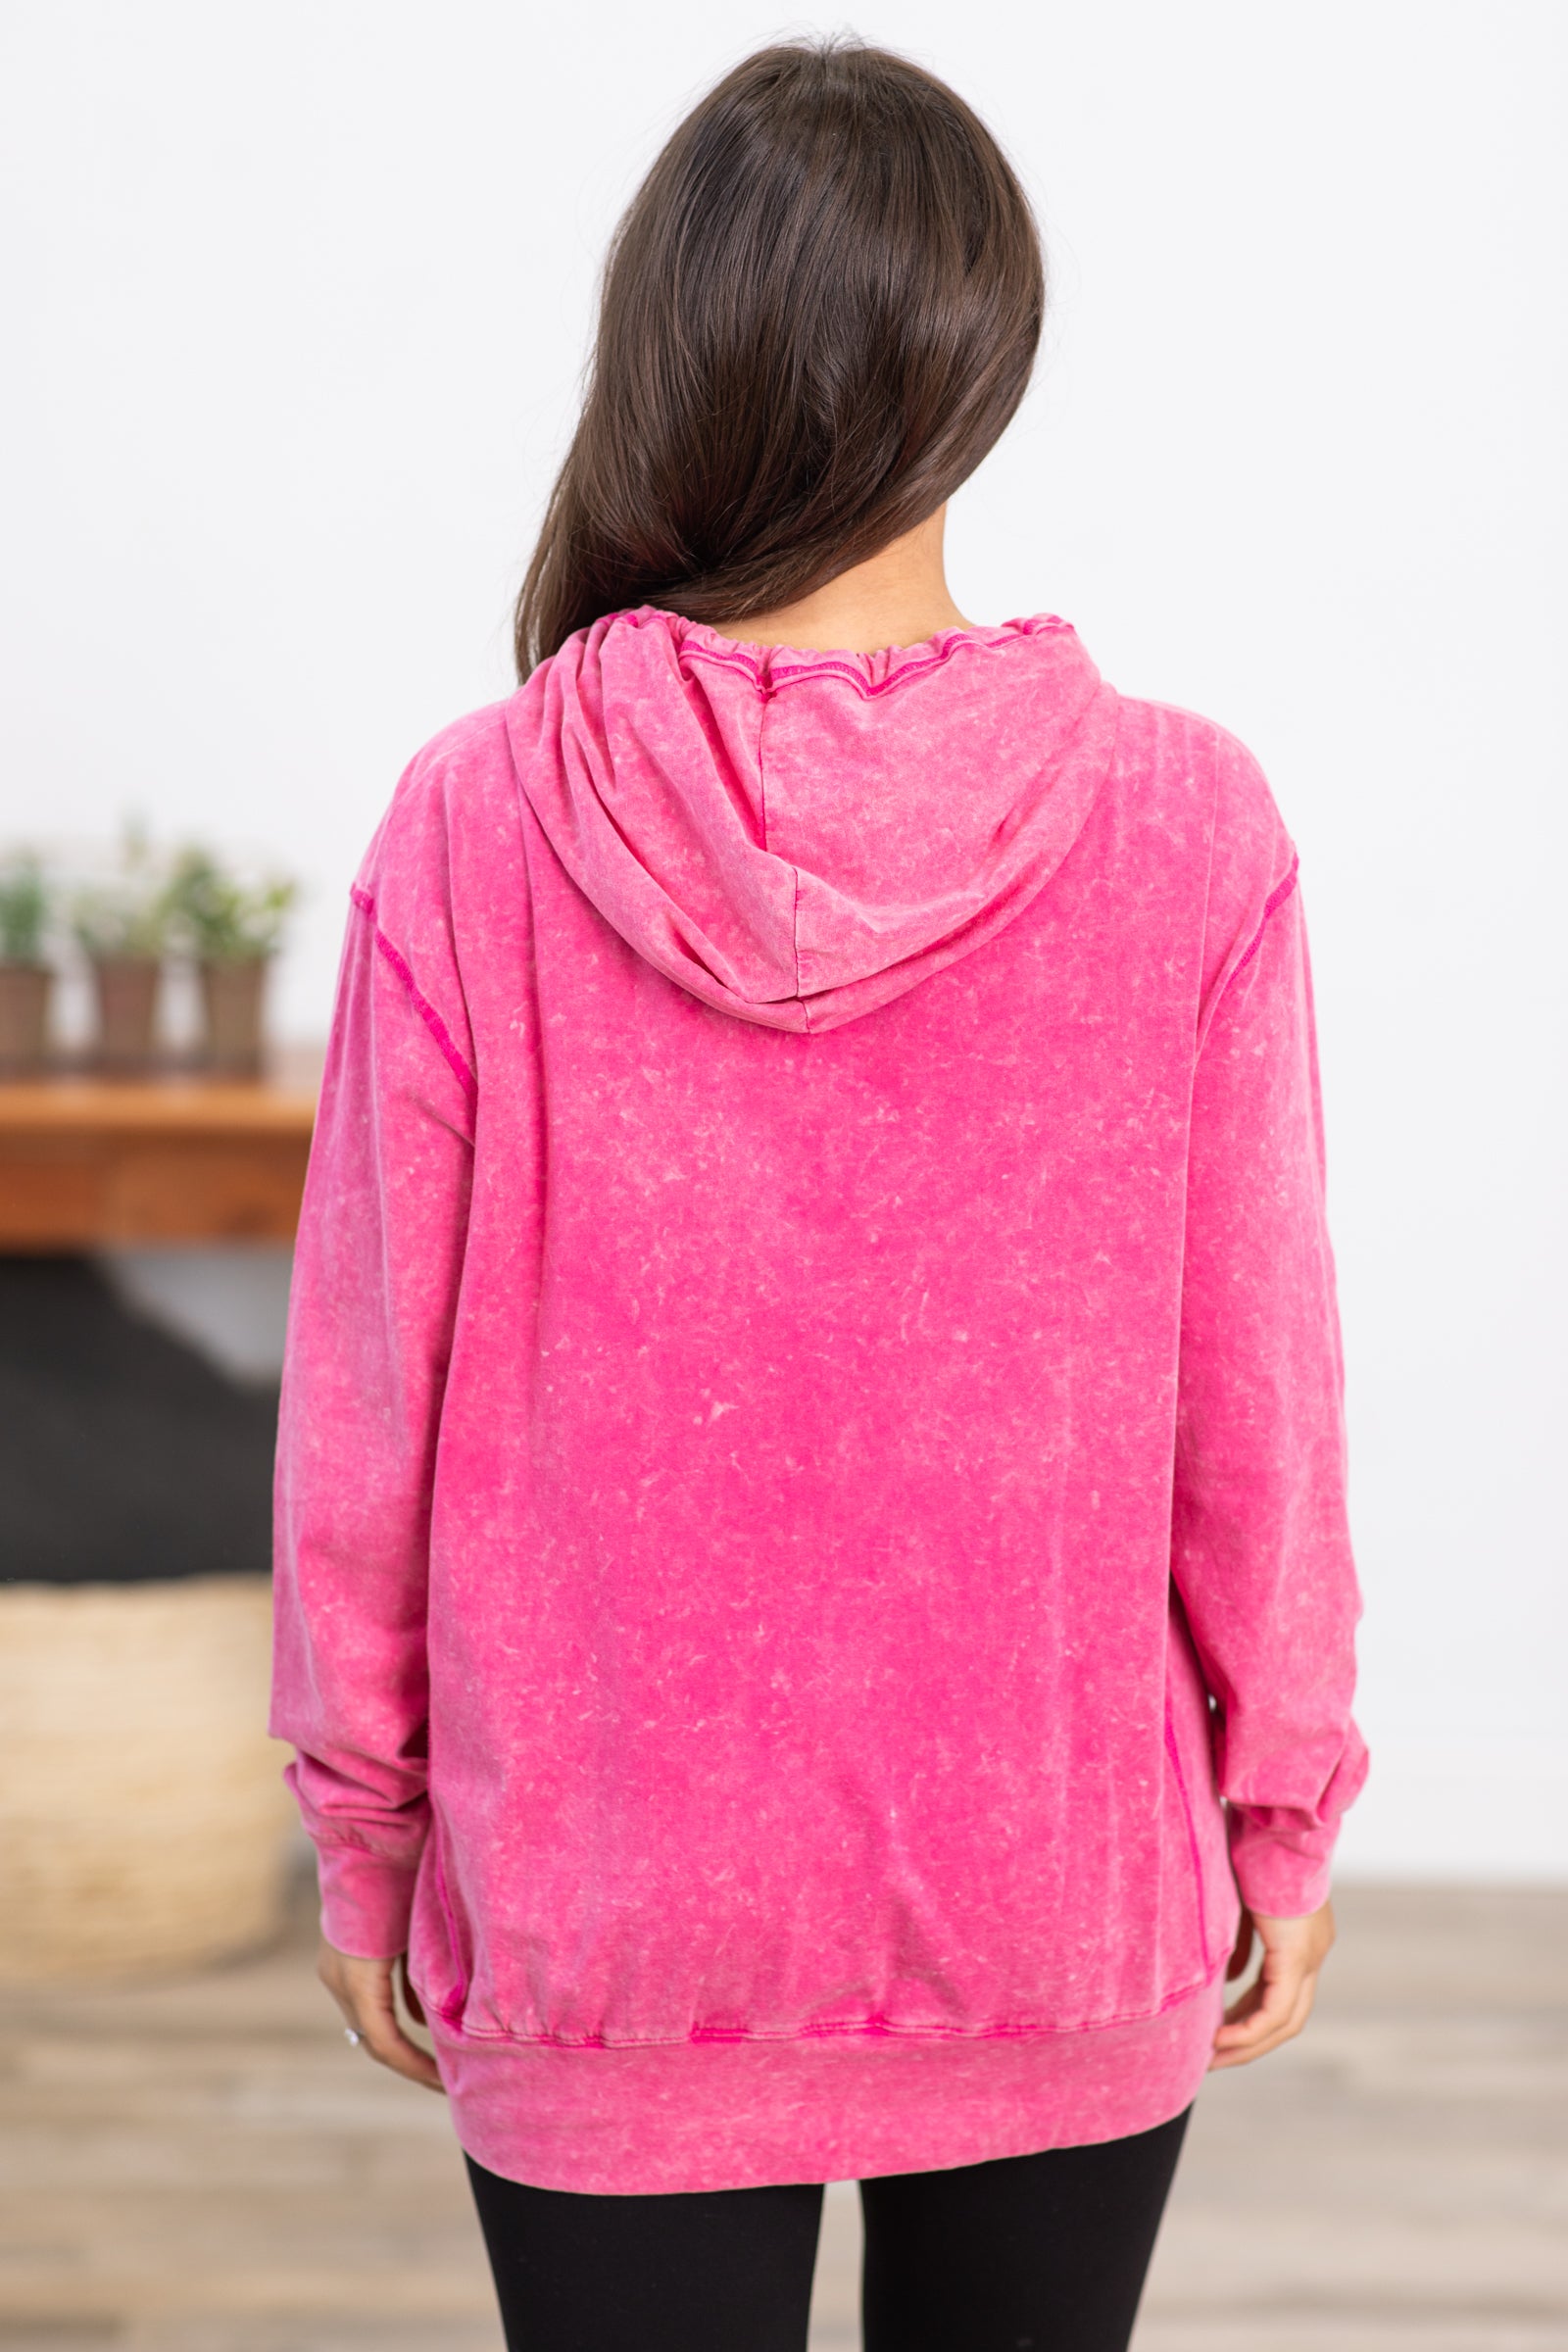 Hot Pink Mineral Wash Hooded Long Sleeve Top